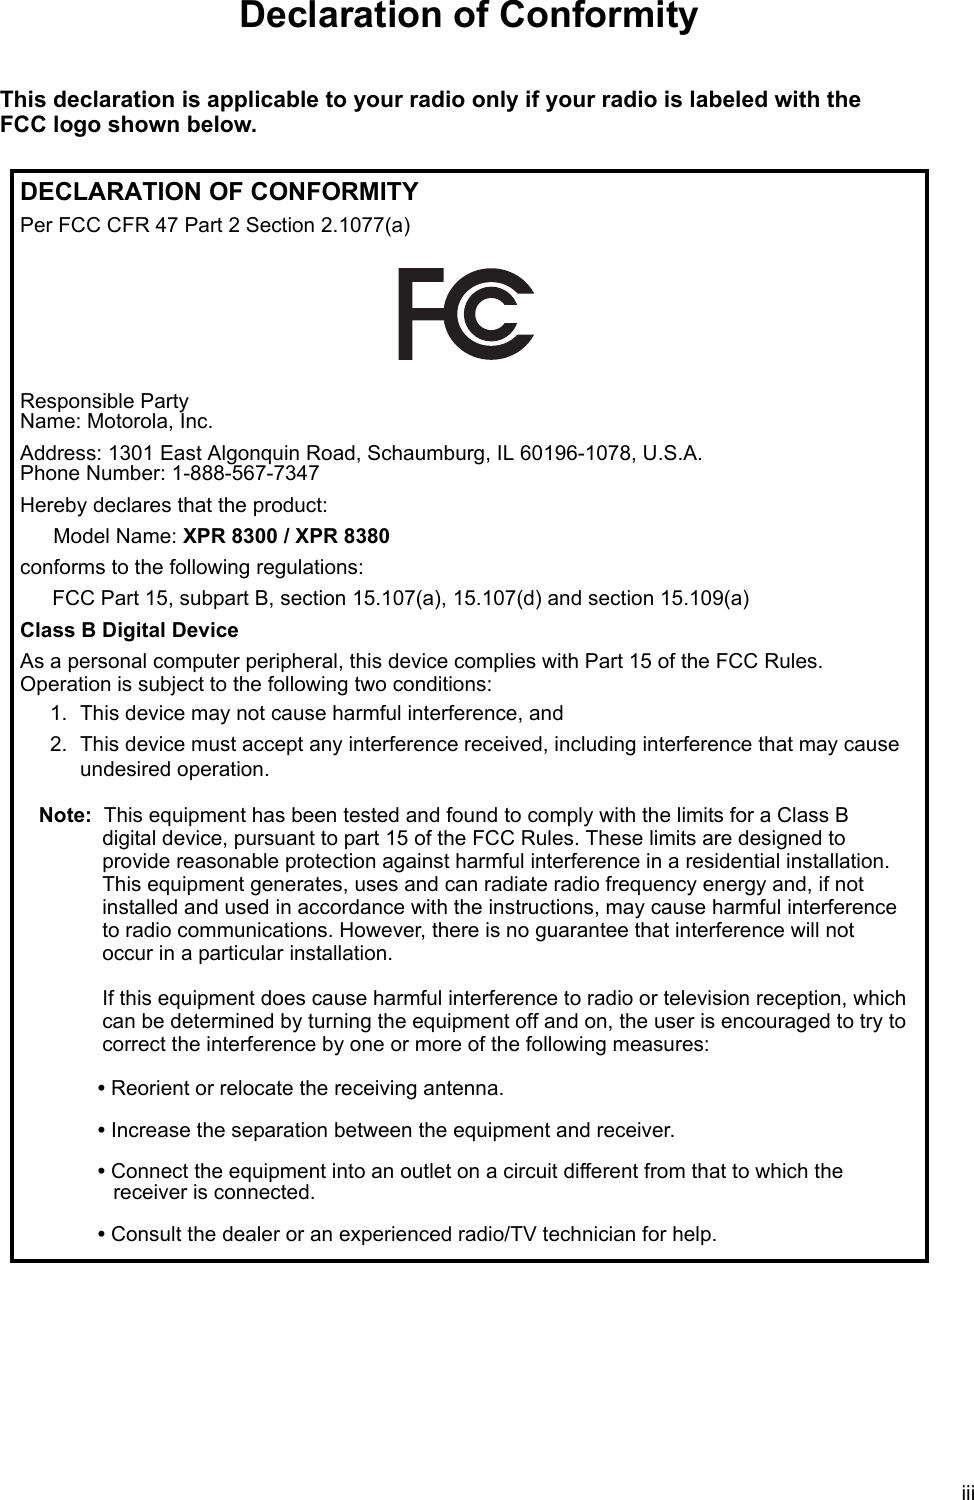 iiiDeclaration of ConformityThis declaration is applicable to your radio only if your radio is labeled with the FCC logo shown below.DECLARATION OF CONFORMITYPer FCC CFR 47 Part 2 Section 2.1077(a)Responsible Party  Name: Motorola, Inc.Address: 1301 East Algonquin Road, Schaumburg, IL 60196-1078, U.S.A. Phone Number: 1-888-567-7347Hereby declares that the product:Model Name: XPR 8300 / XPR 8380conforms to the following regulations:FCC Part 15, subpart B, section 15.107(a), 15.107(d) and section 15.109(a)Class B Digital DeviceAs a personal computer peripheral, this device complies with Part 15 of the FCC Rules.  Operation is subject to the following two conditions:1. This device may not cause harmful interference, and 2. This device must accept any interference received, including interference that may cause undesired operation.Note: This equipment has been tested and found to comply with the limits for a Class B  digital device, pursuant to part 15 of the FCC Rules. These limits are designed to  provide reasonable protection against harmful interference in a residential installation.  This equipment generates, uses and can radiate radio frequency energy and, if not installed and used in accordance with the instructions, may cause harmful interference  to radio communications. However, there is no guarantee that interference will not  occur in a particular installation.   If this equipment does cause harmful interference to radio or television reception, which can be determined by turning the equipment off and on, the user is encouraged to try to correct the interference by one or more of the following measures:• Reorient or relocate the receiving antenna.• Increase the separation between the equipment and receiver.• Connect the equipment into an outlet on a circuit different from that to which the  receiver is connected. • Consult the dealer or an experienced radio/TV technician for help.